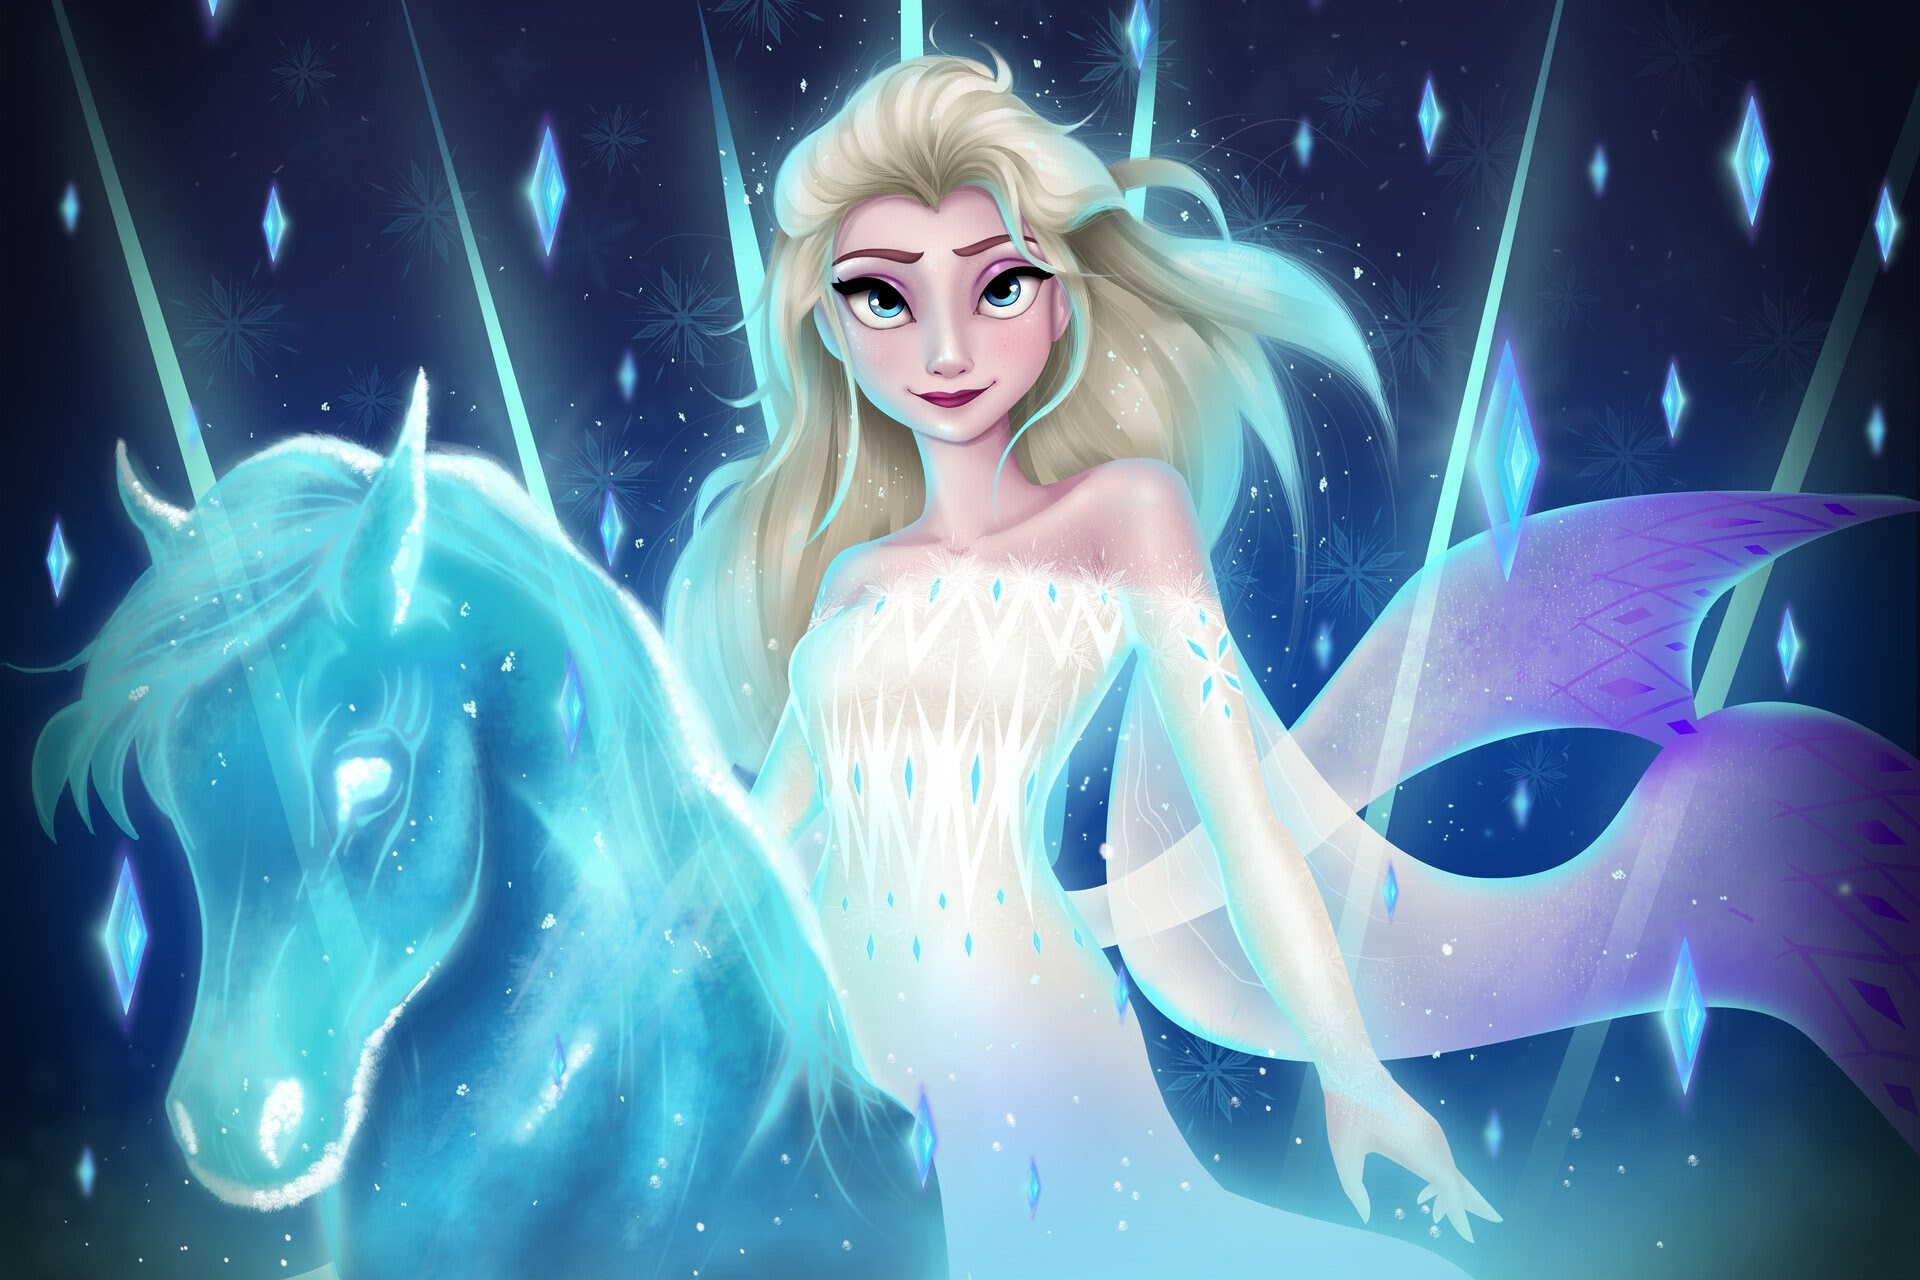 Elsa In Frozen 2 : Report: 'Frozen 2' Will See Elsa Come Out As A